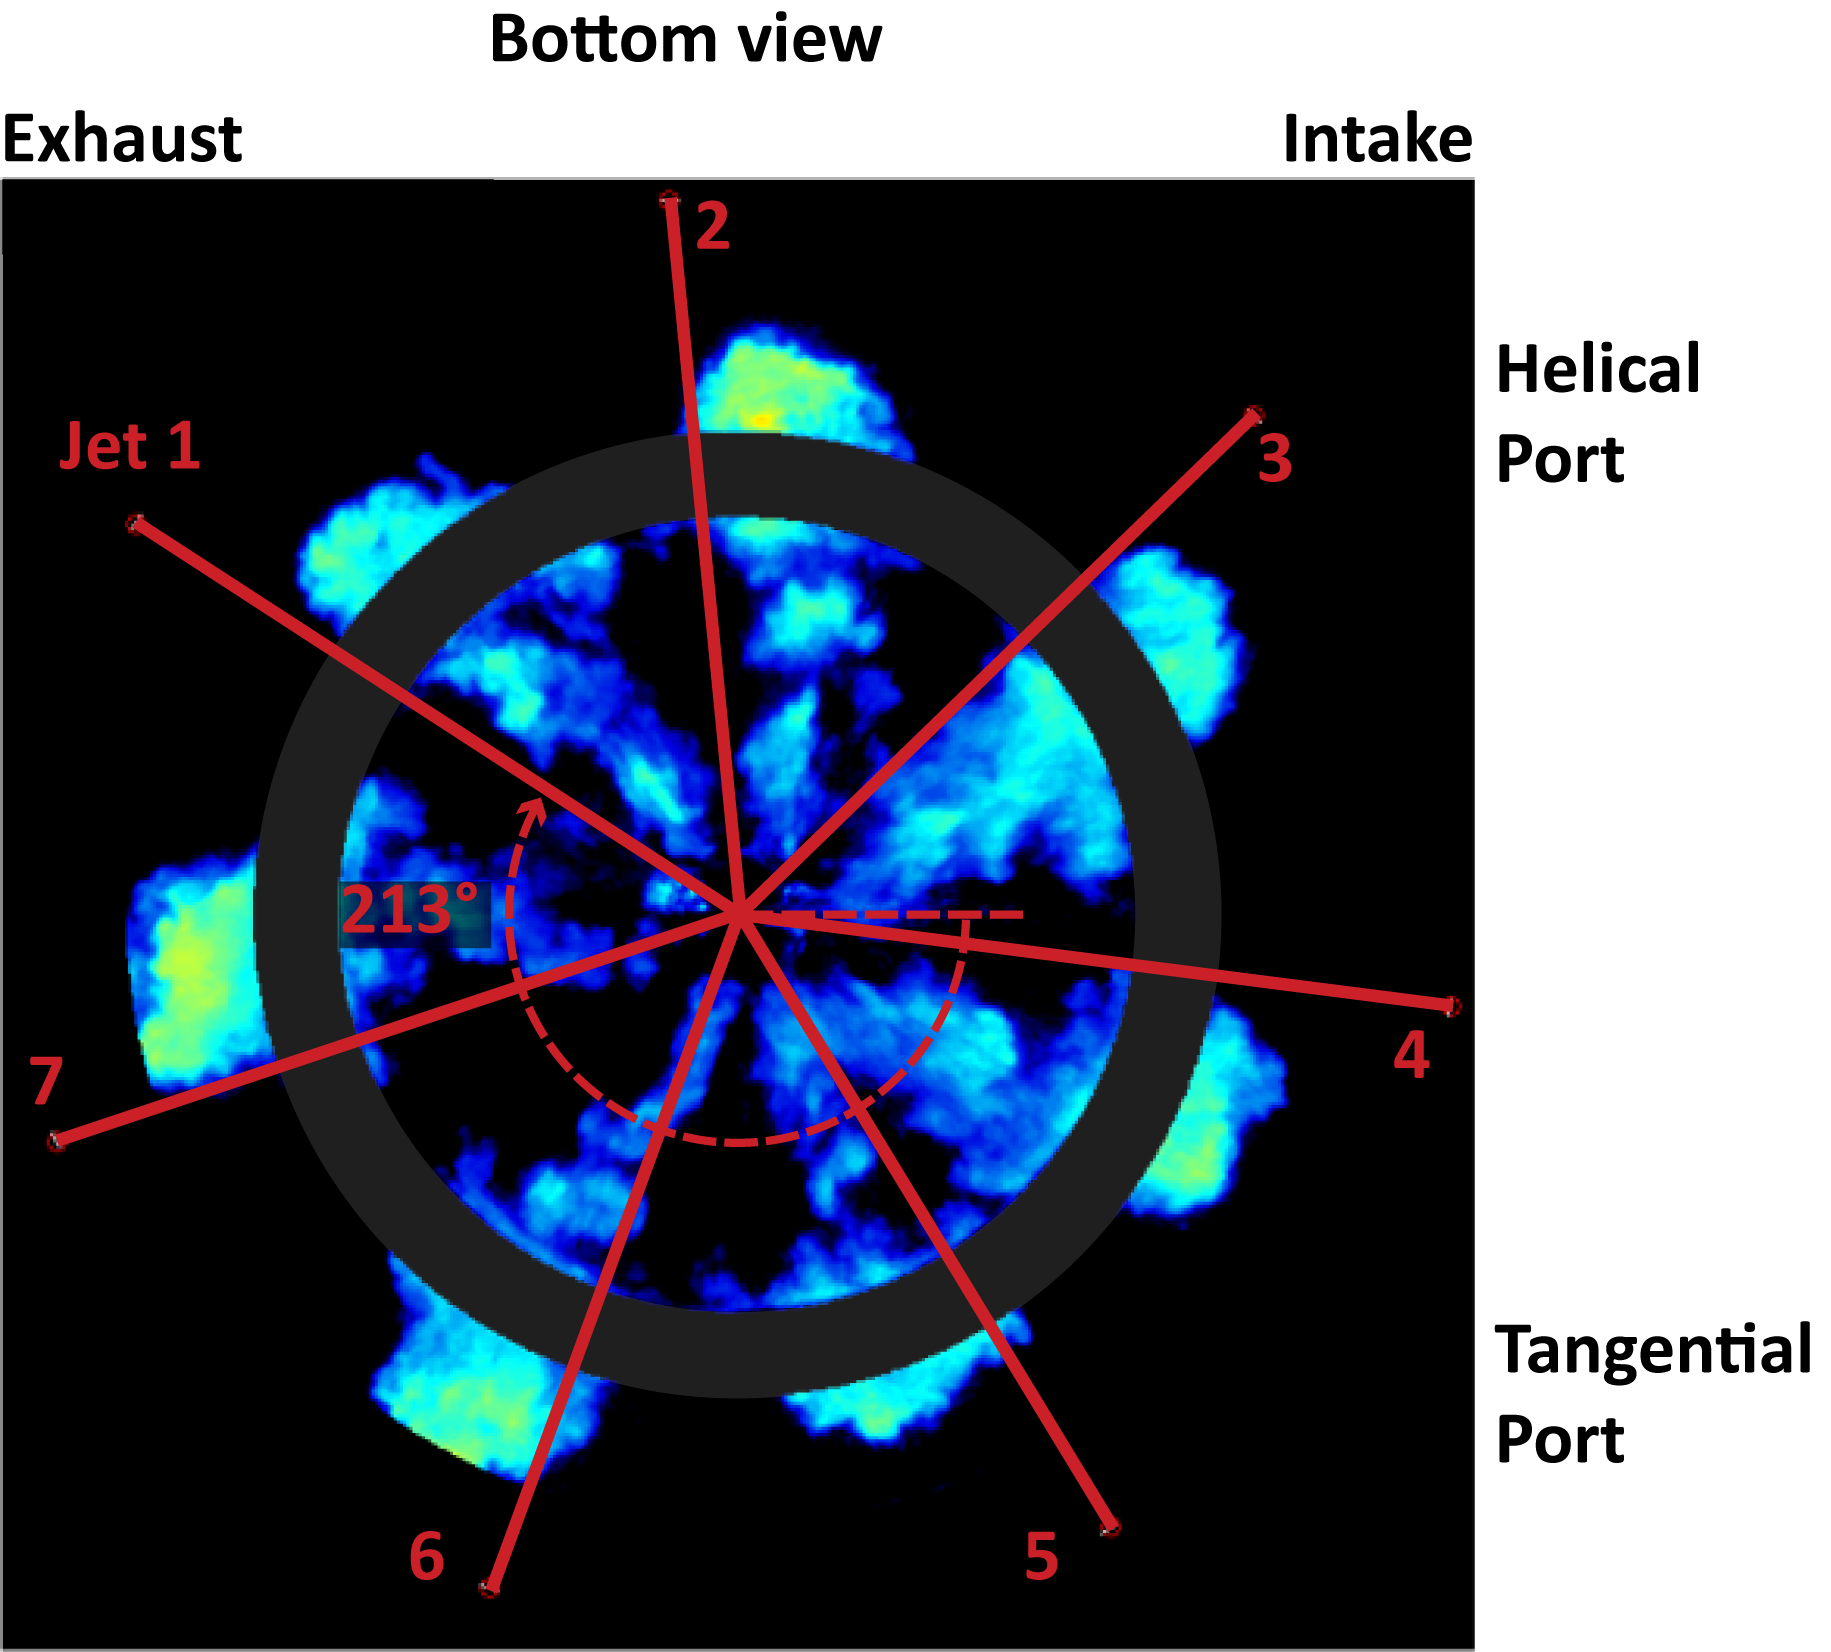 Injector clocking and image orientation for piston bowl geometry study